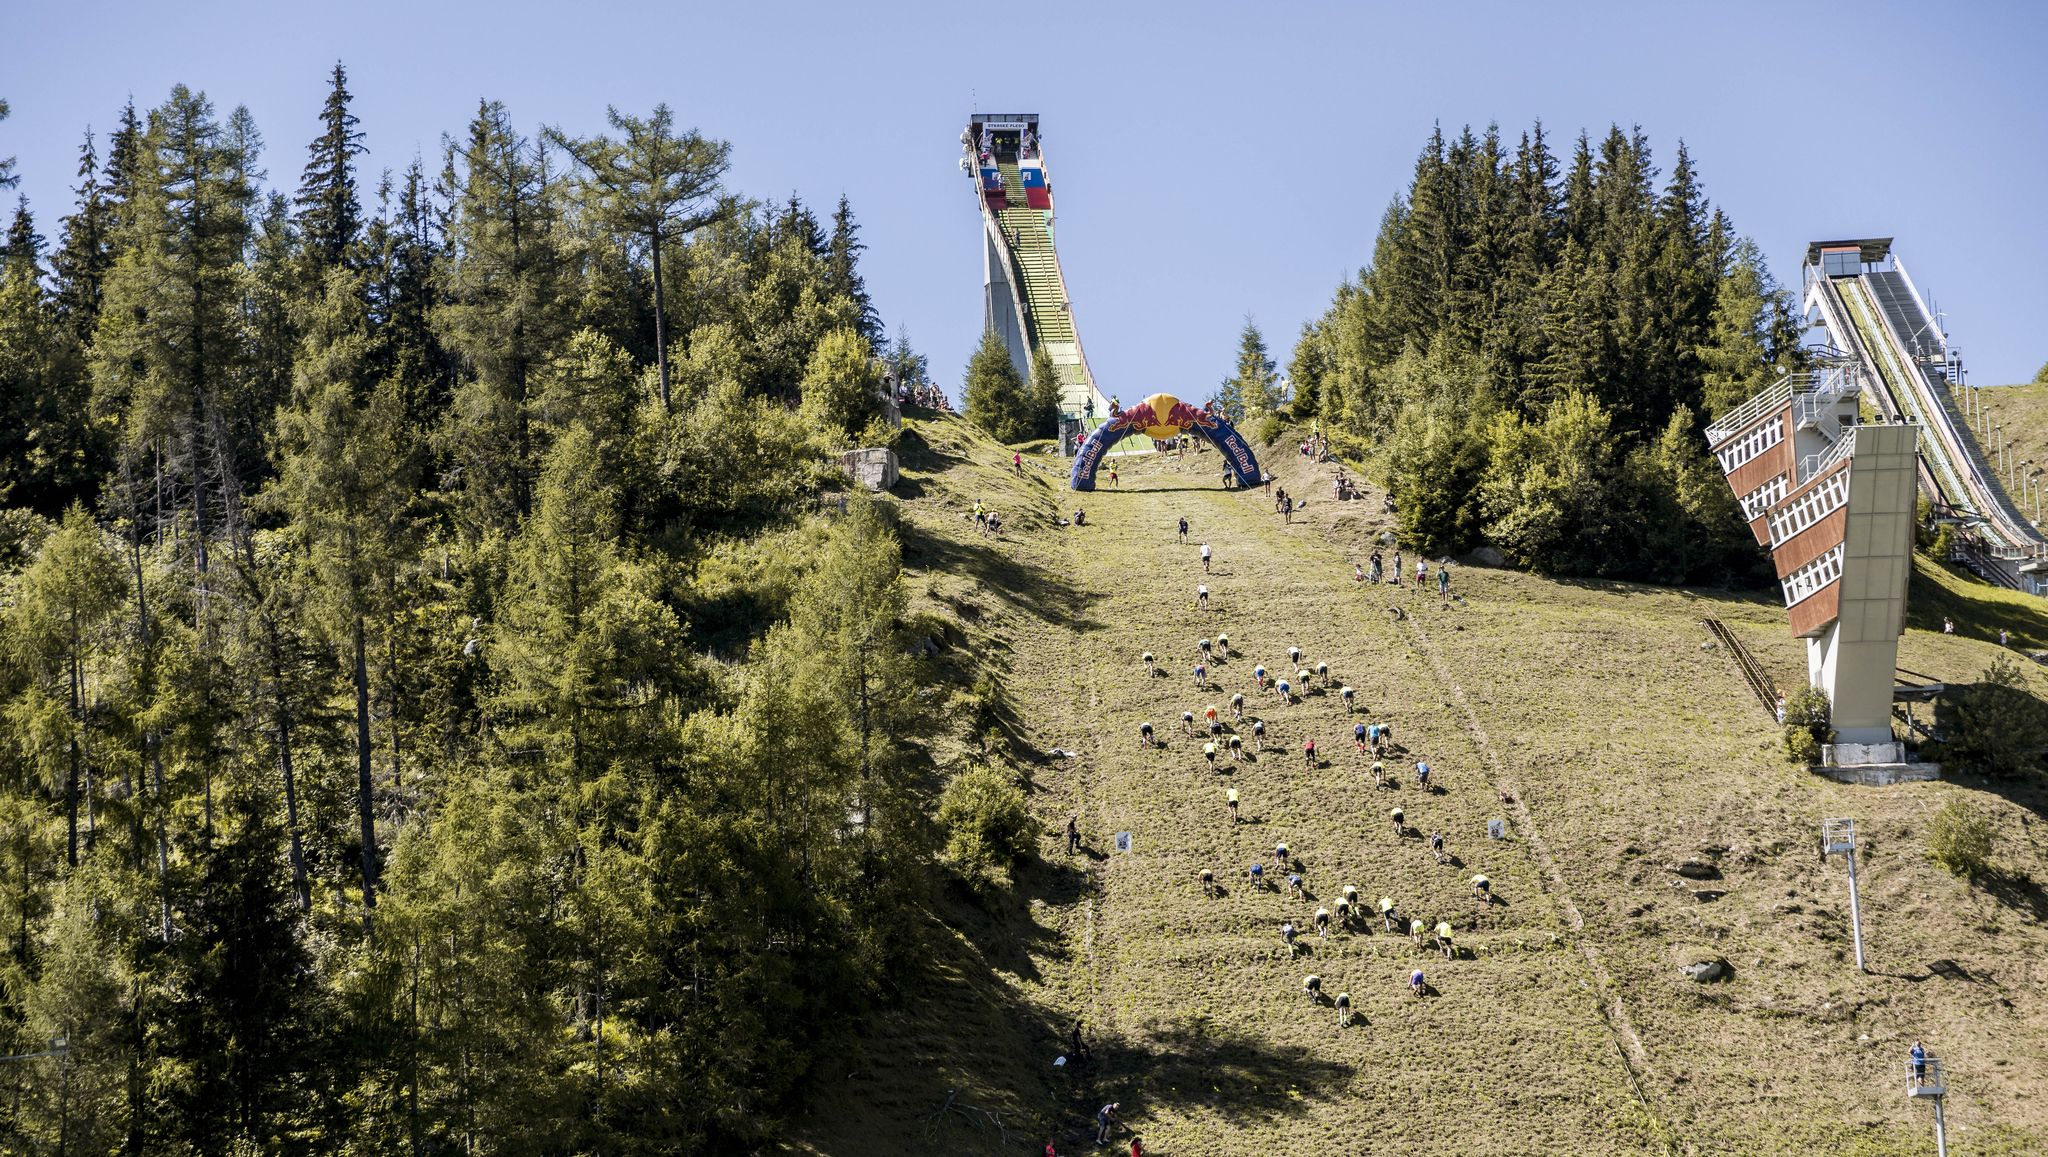 venue of the red bull 400 at Štrbské pleso, slovakia on august 22, 2020